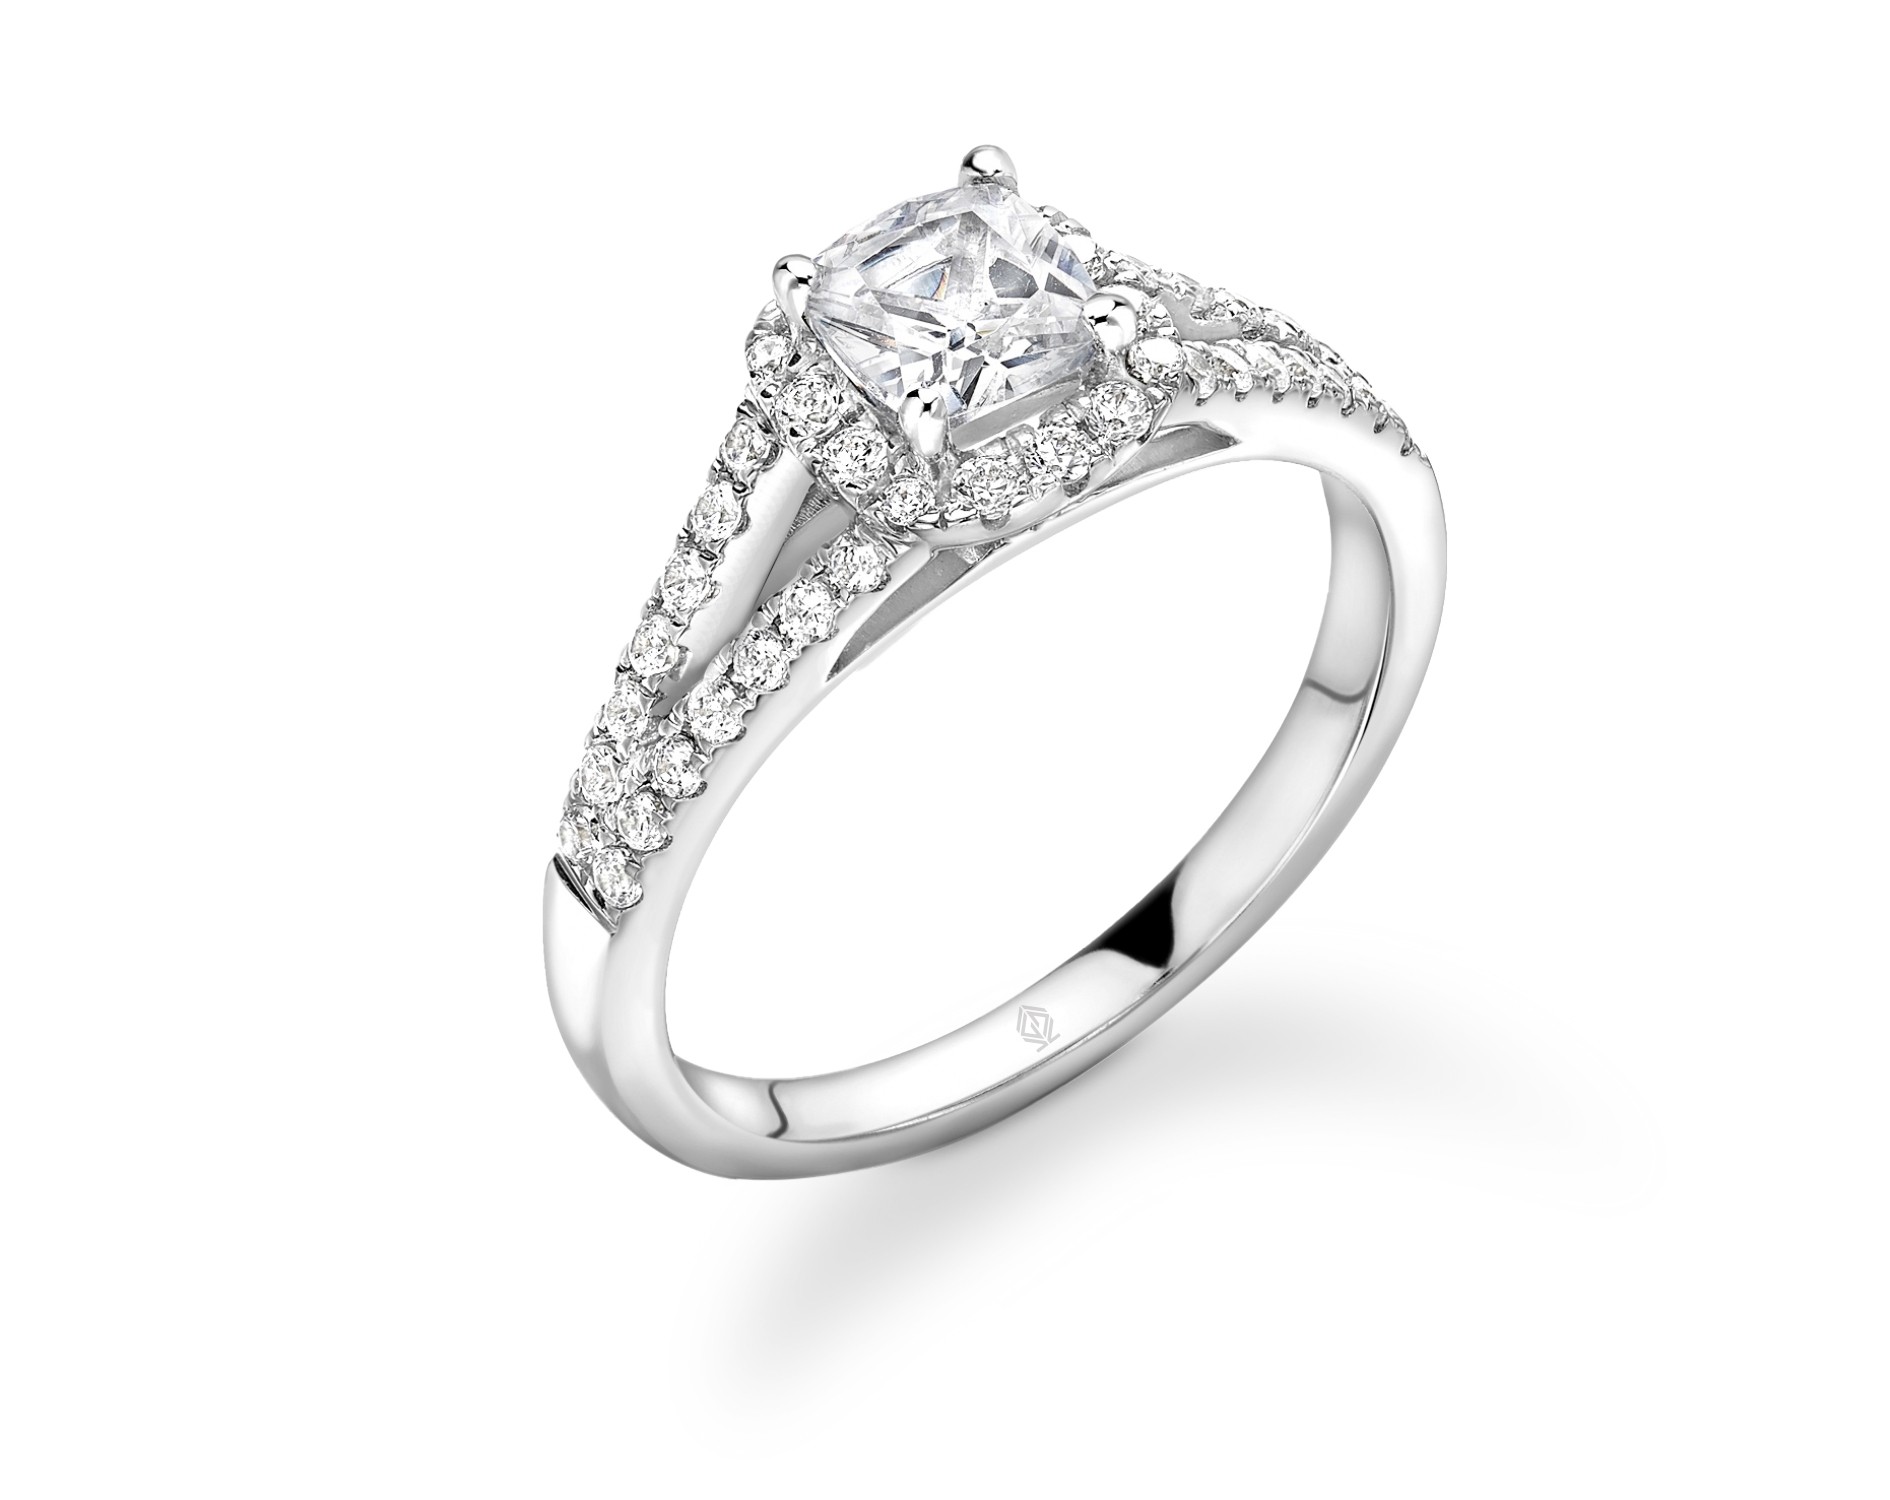 18K WHITE GOLD CUSHION CUT HALO DIAMOND ENGAGEMENT RING WITH SIDE STONES IN SPLIT SHANK PAVE SET